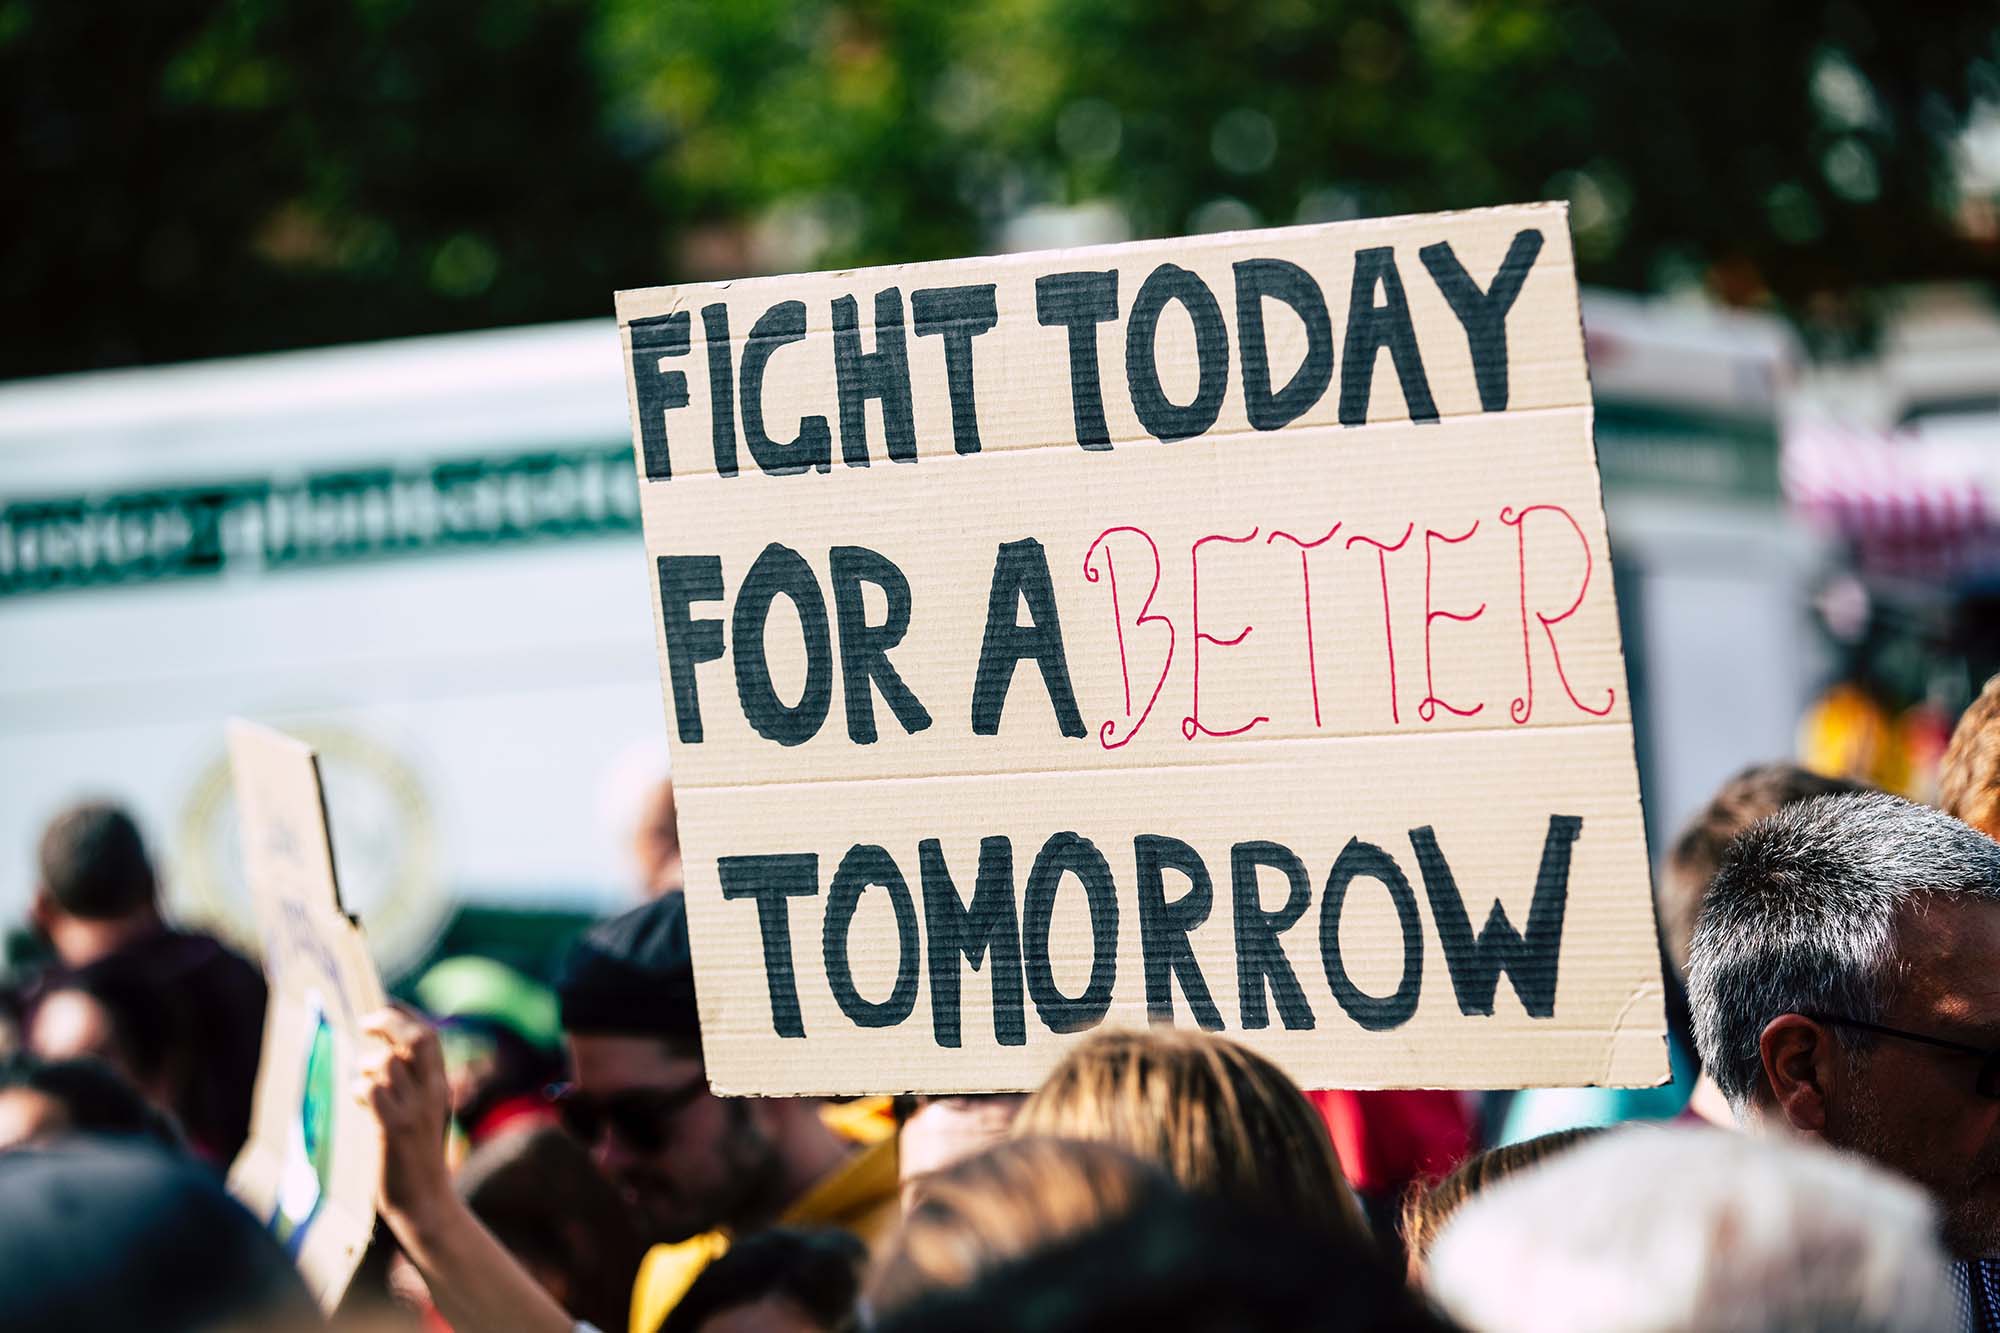 A protester holding a sign reading "fight today for a better tomorrow"